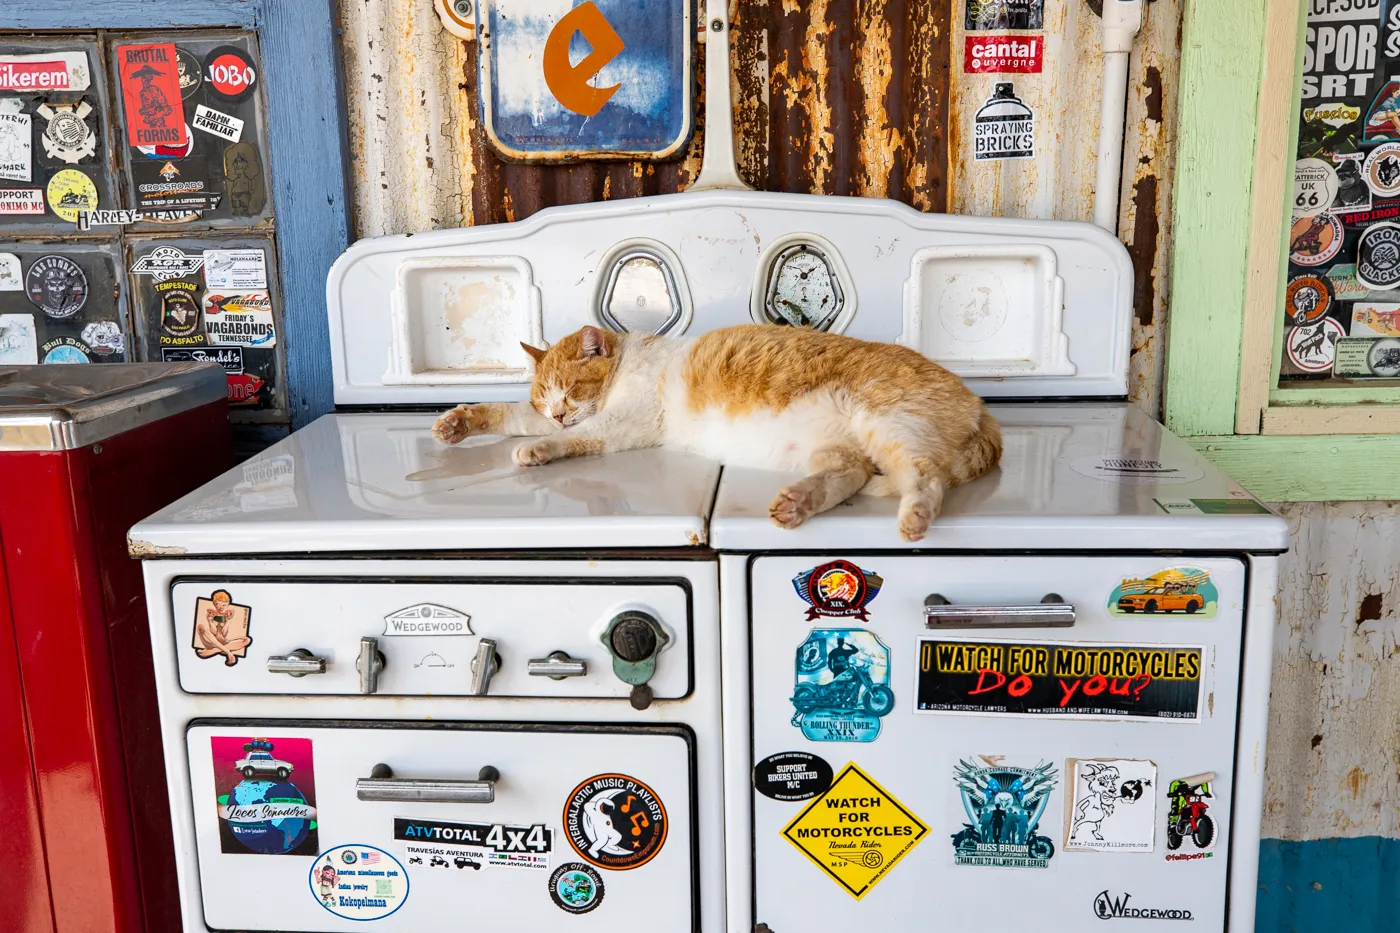 Resident cat at Hackberry General Store in Kingman, Arizona Route 66 Roadside Attraction and Souvenir Shop